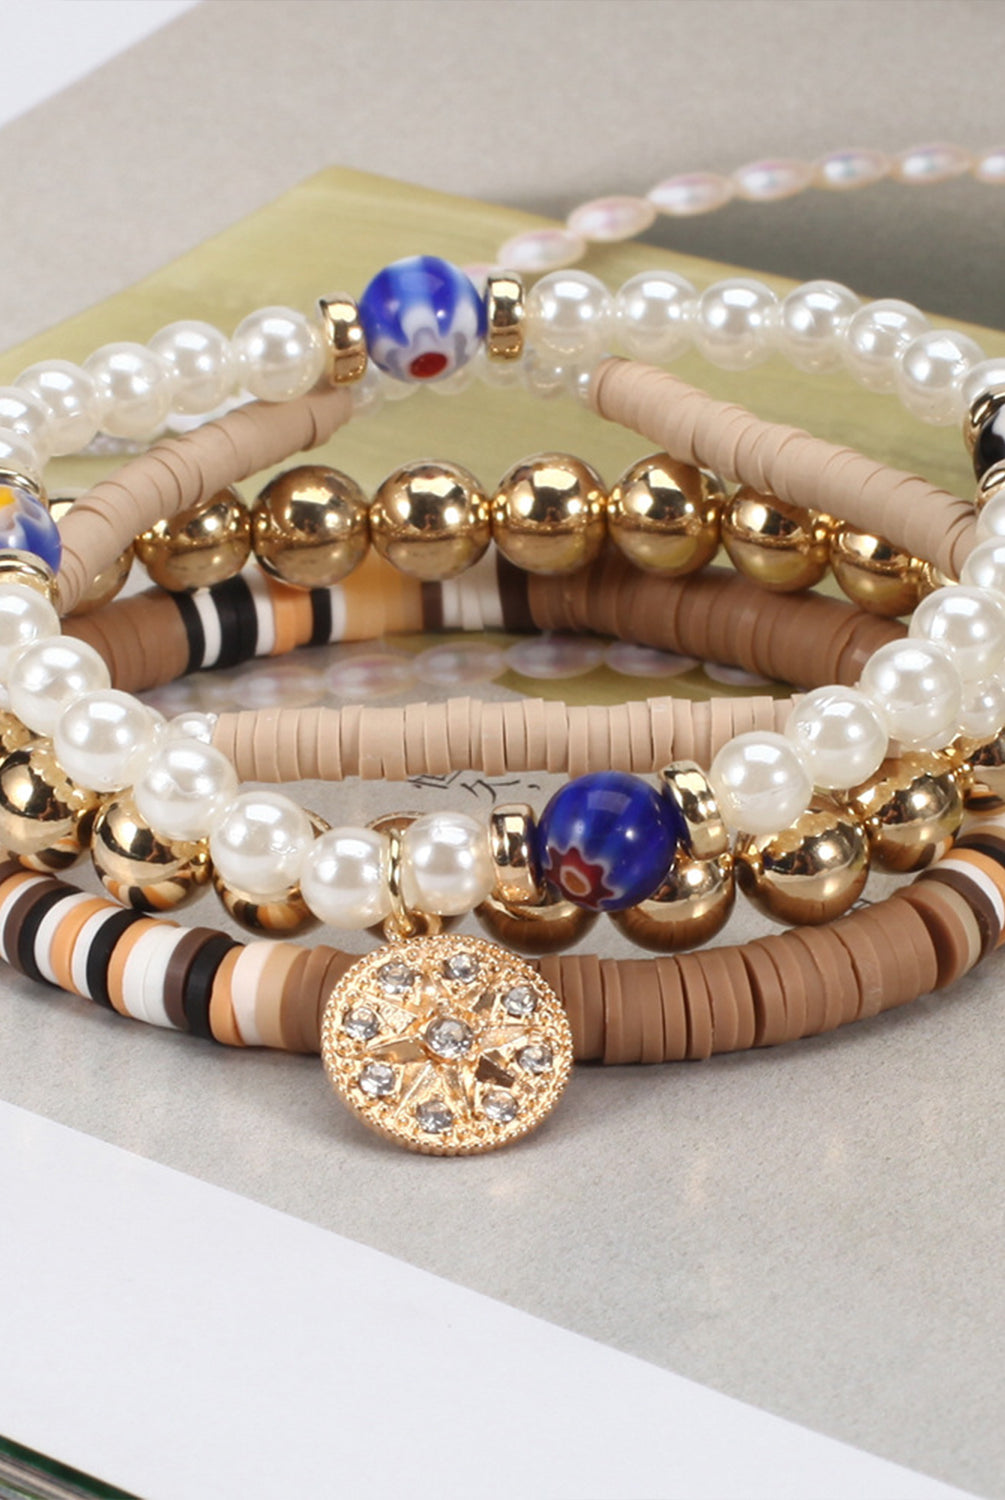 Elegant soft pottery bead bracelet with pearls, gold spheres, and a central sparkling charm.